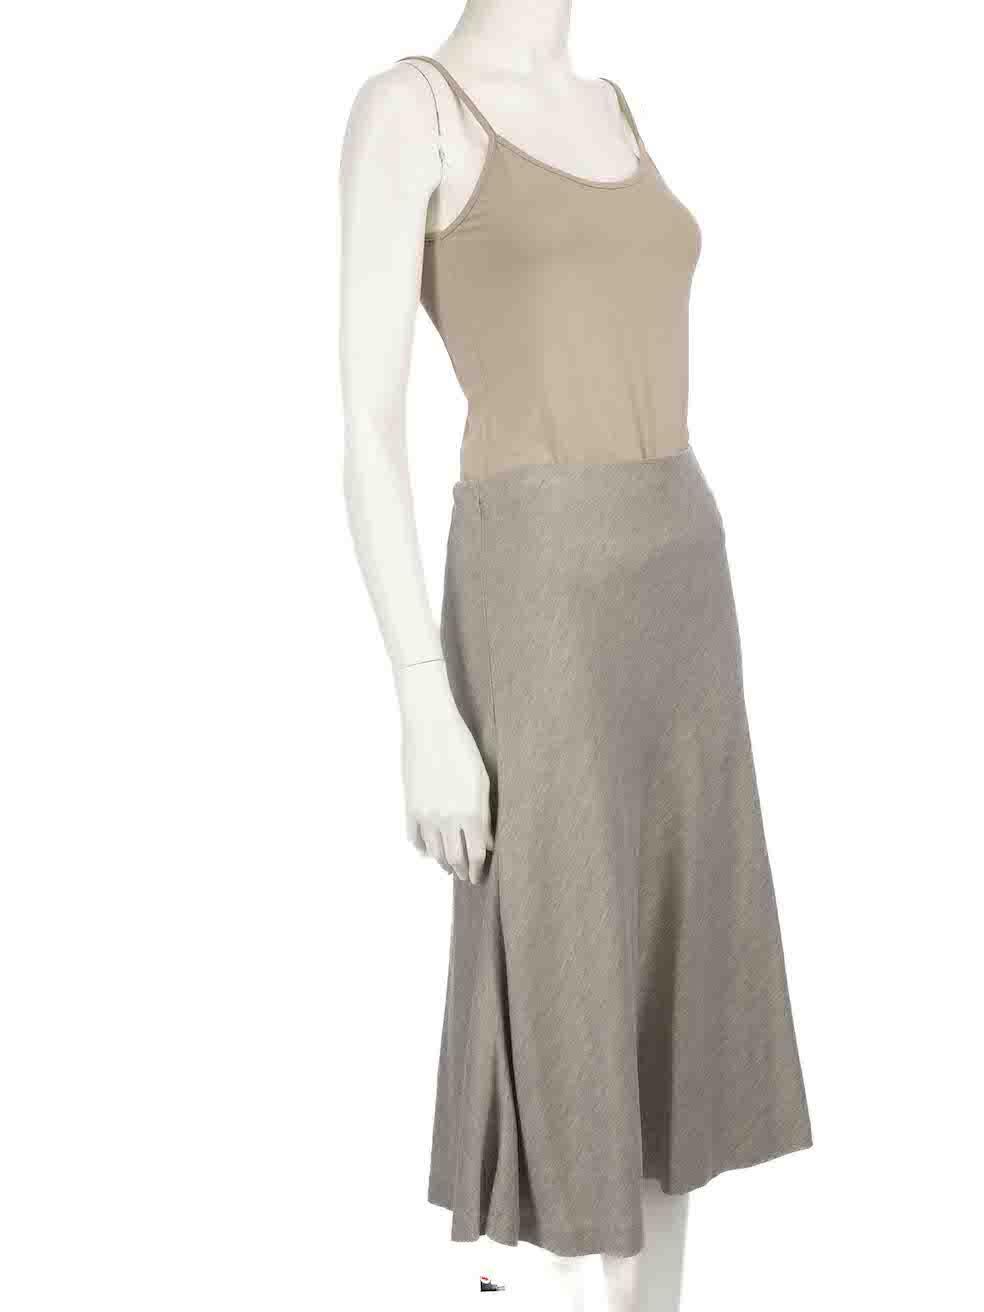 CONDITION is Very good. Hardly any visible wear to skirt is evident on this used Ralph Lauren designer resale item.
 
 
 
 Details
 
 
 Grey
 
 Silk
 
 A-line skirt
 
 Knee length
 
 Stretchy
 
 Elasticated waistband
 
 
 
 
 
 Made in Italy
 
 
 
